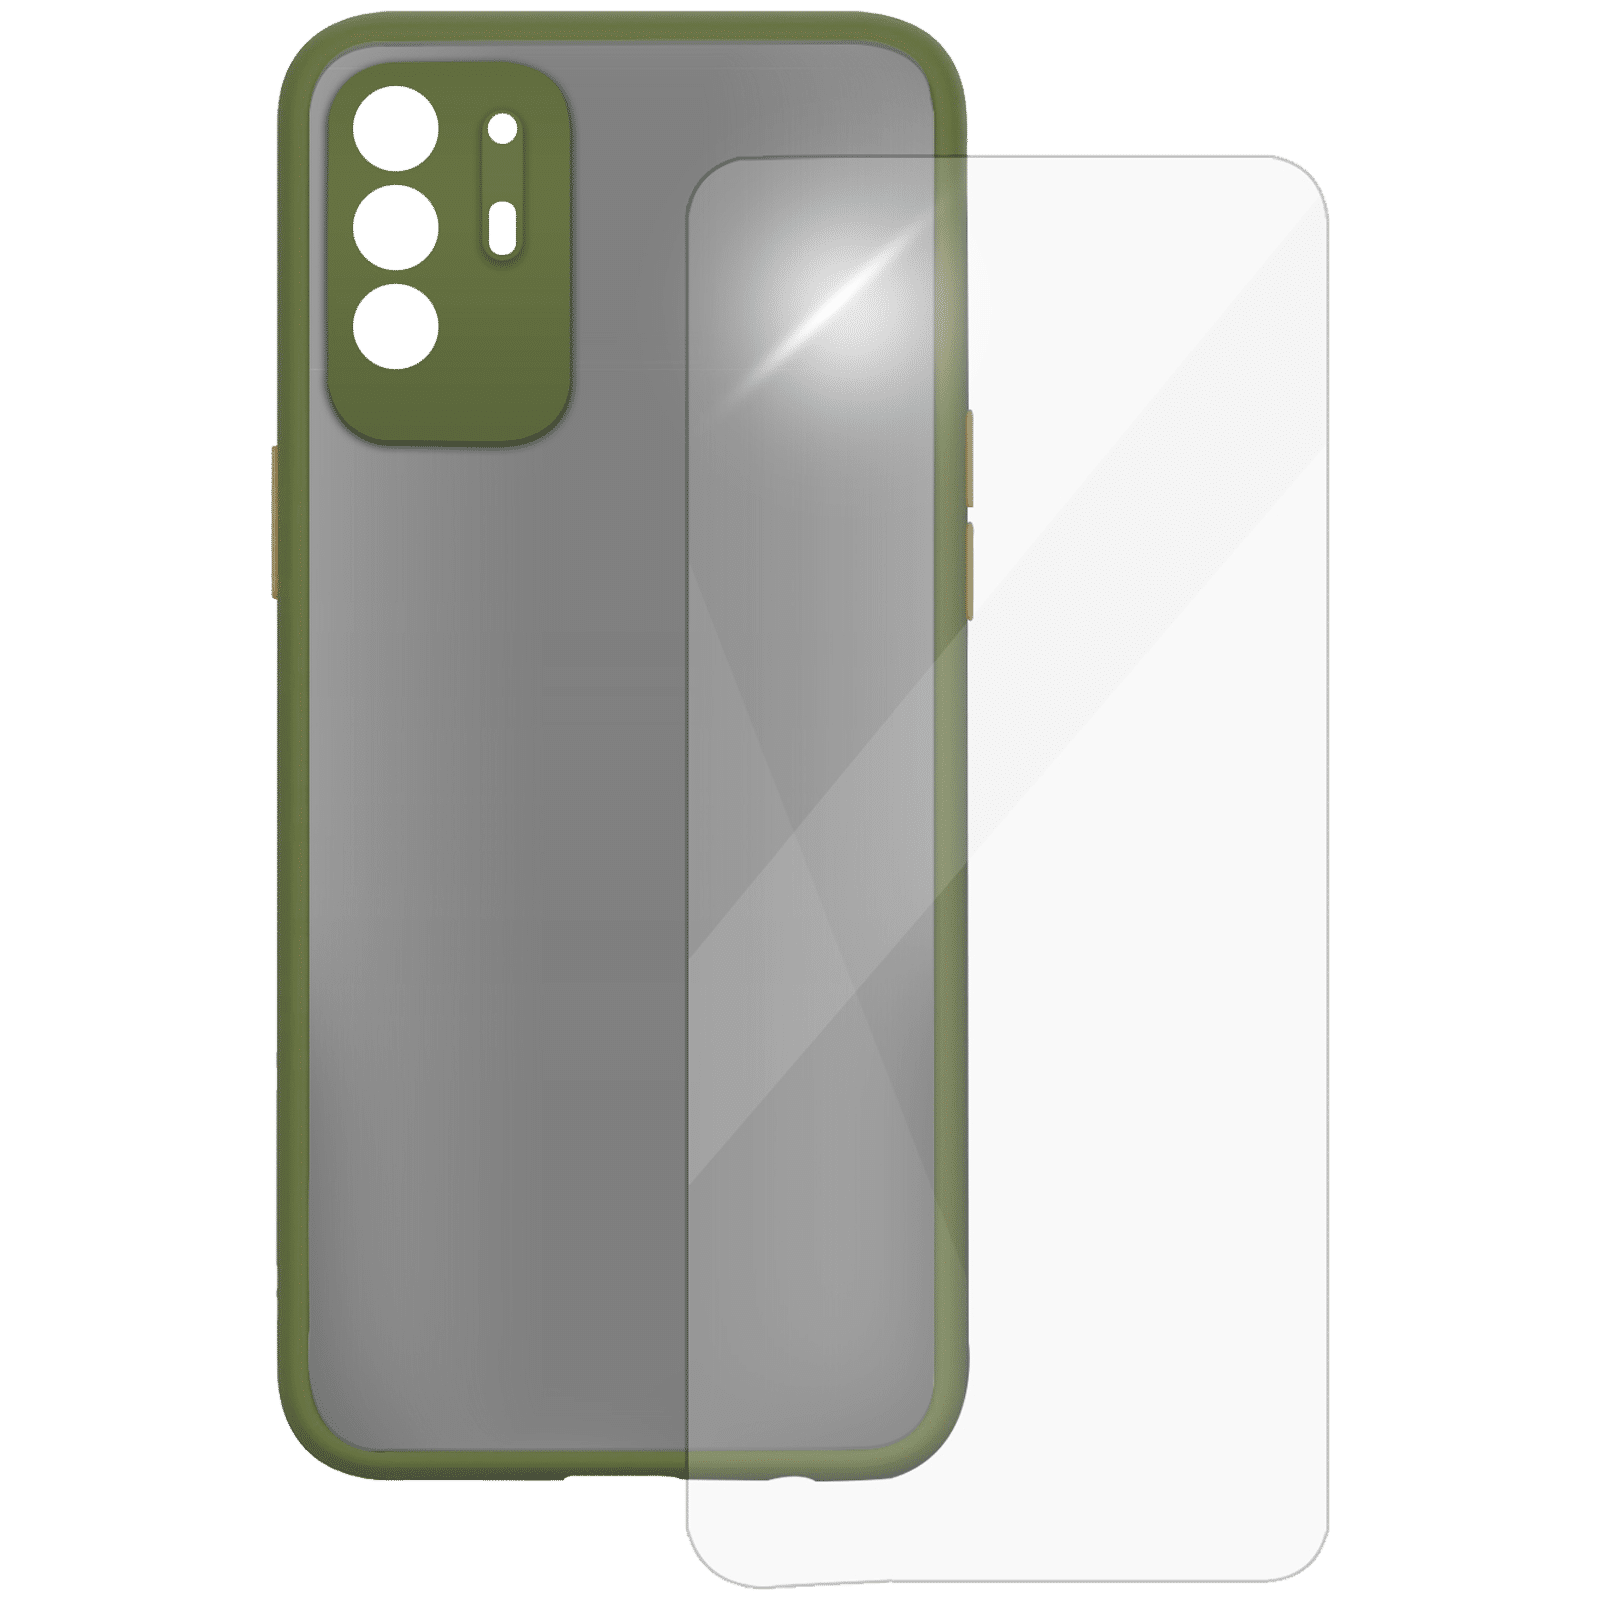 Buy Arrow Camera Duplex Screen Protector And Polycarbonate Back Cover Combo For Oppo F19 Pro Plus 5299